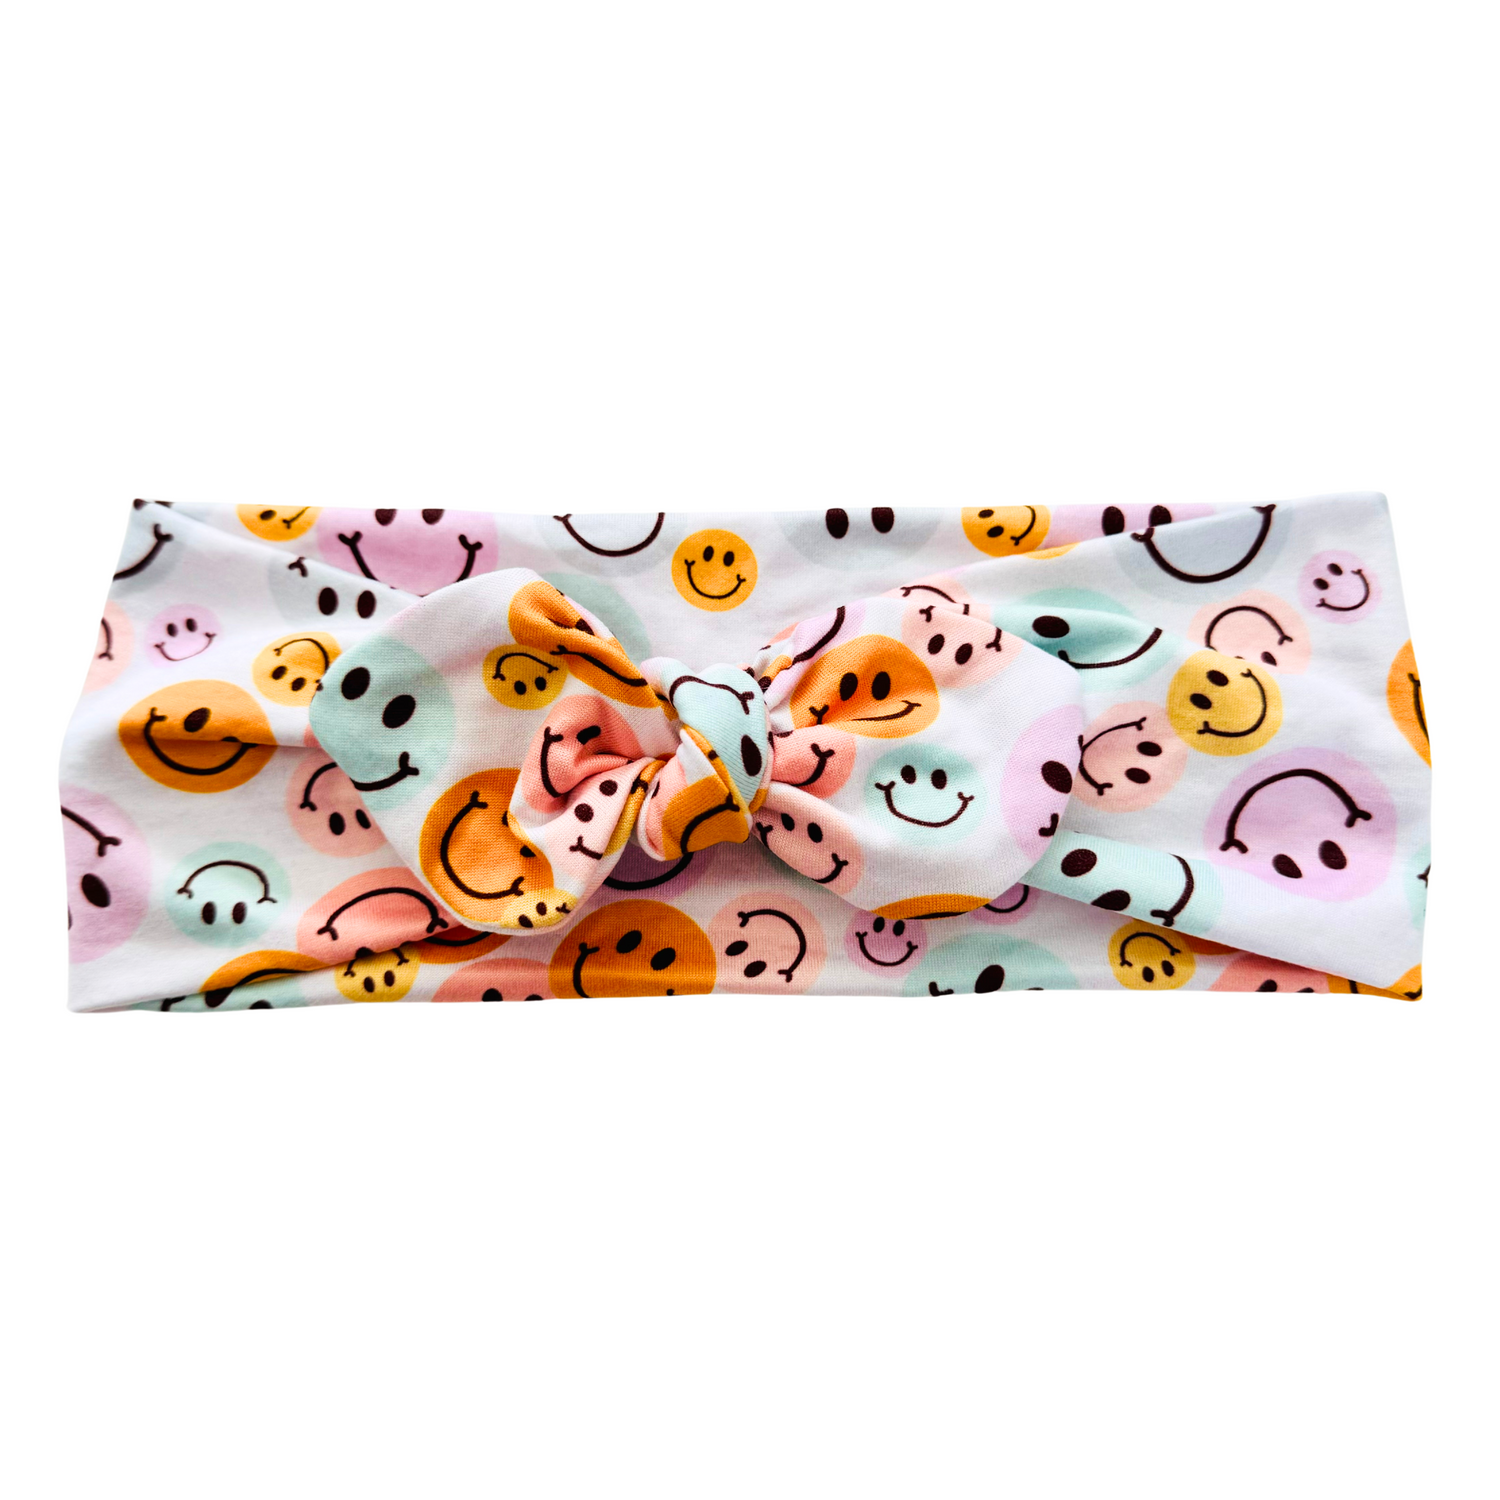 Happy Sweetheart (or removable tie option)  Sewing Sweethearts Sweetheart with removable tie  